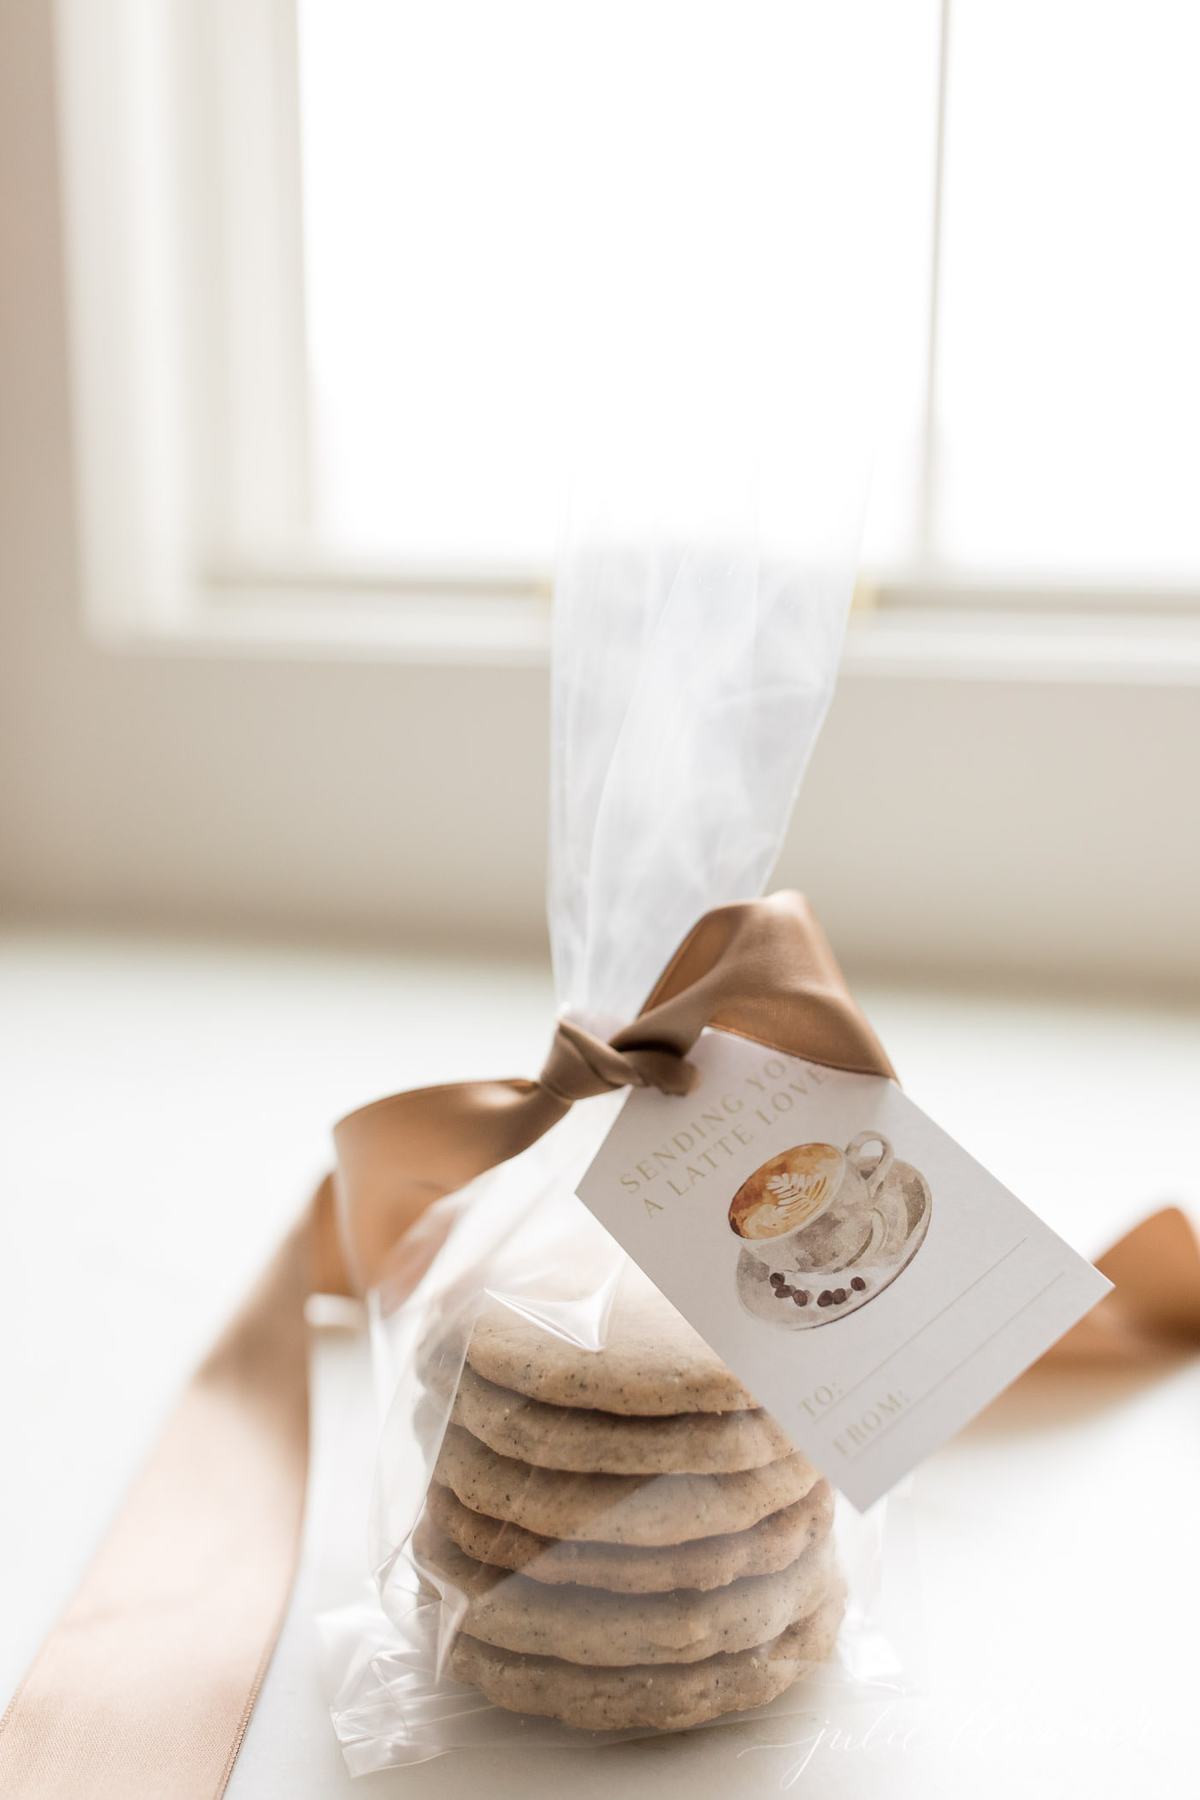 stacked espresso cookies wrapped in cellophane and tied with a brown satin bow and gift tag.